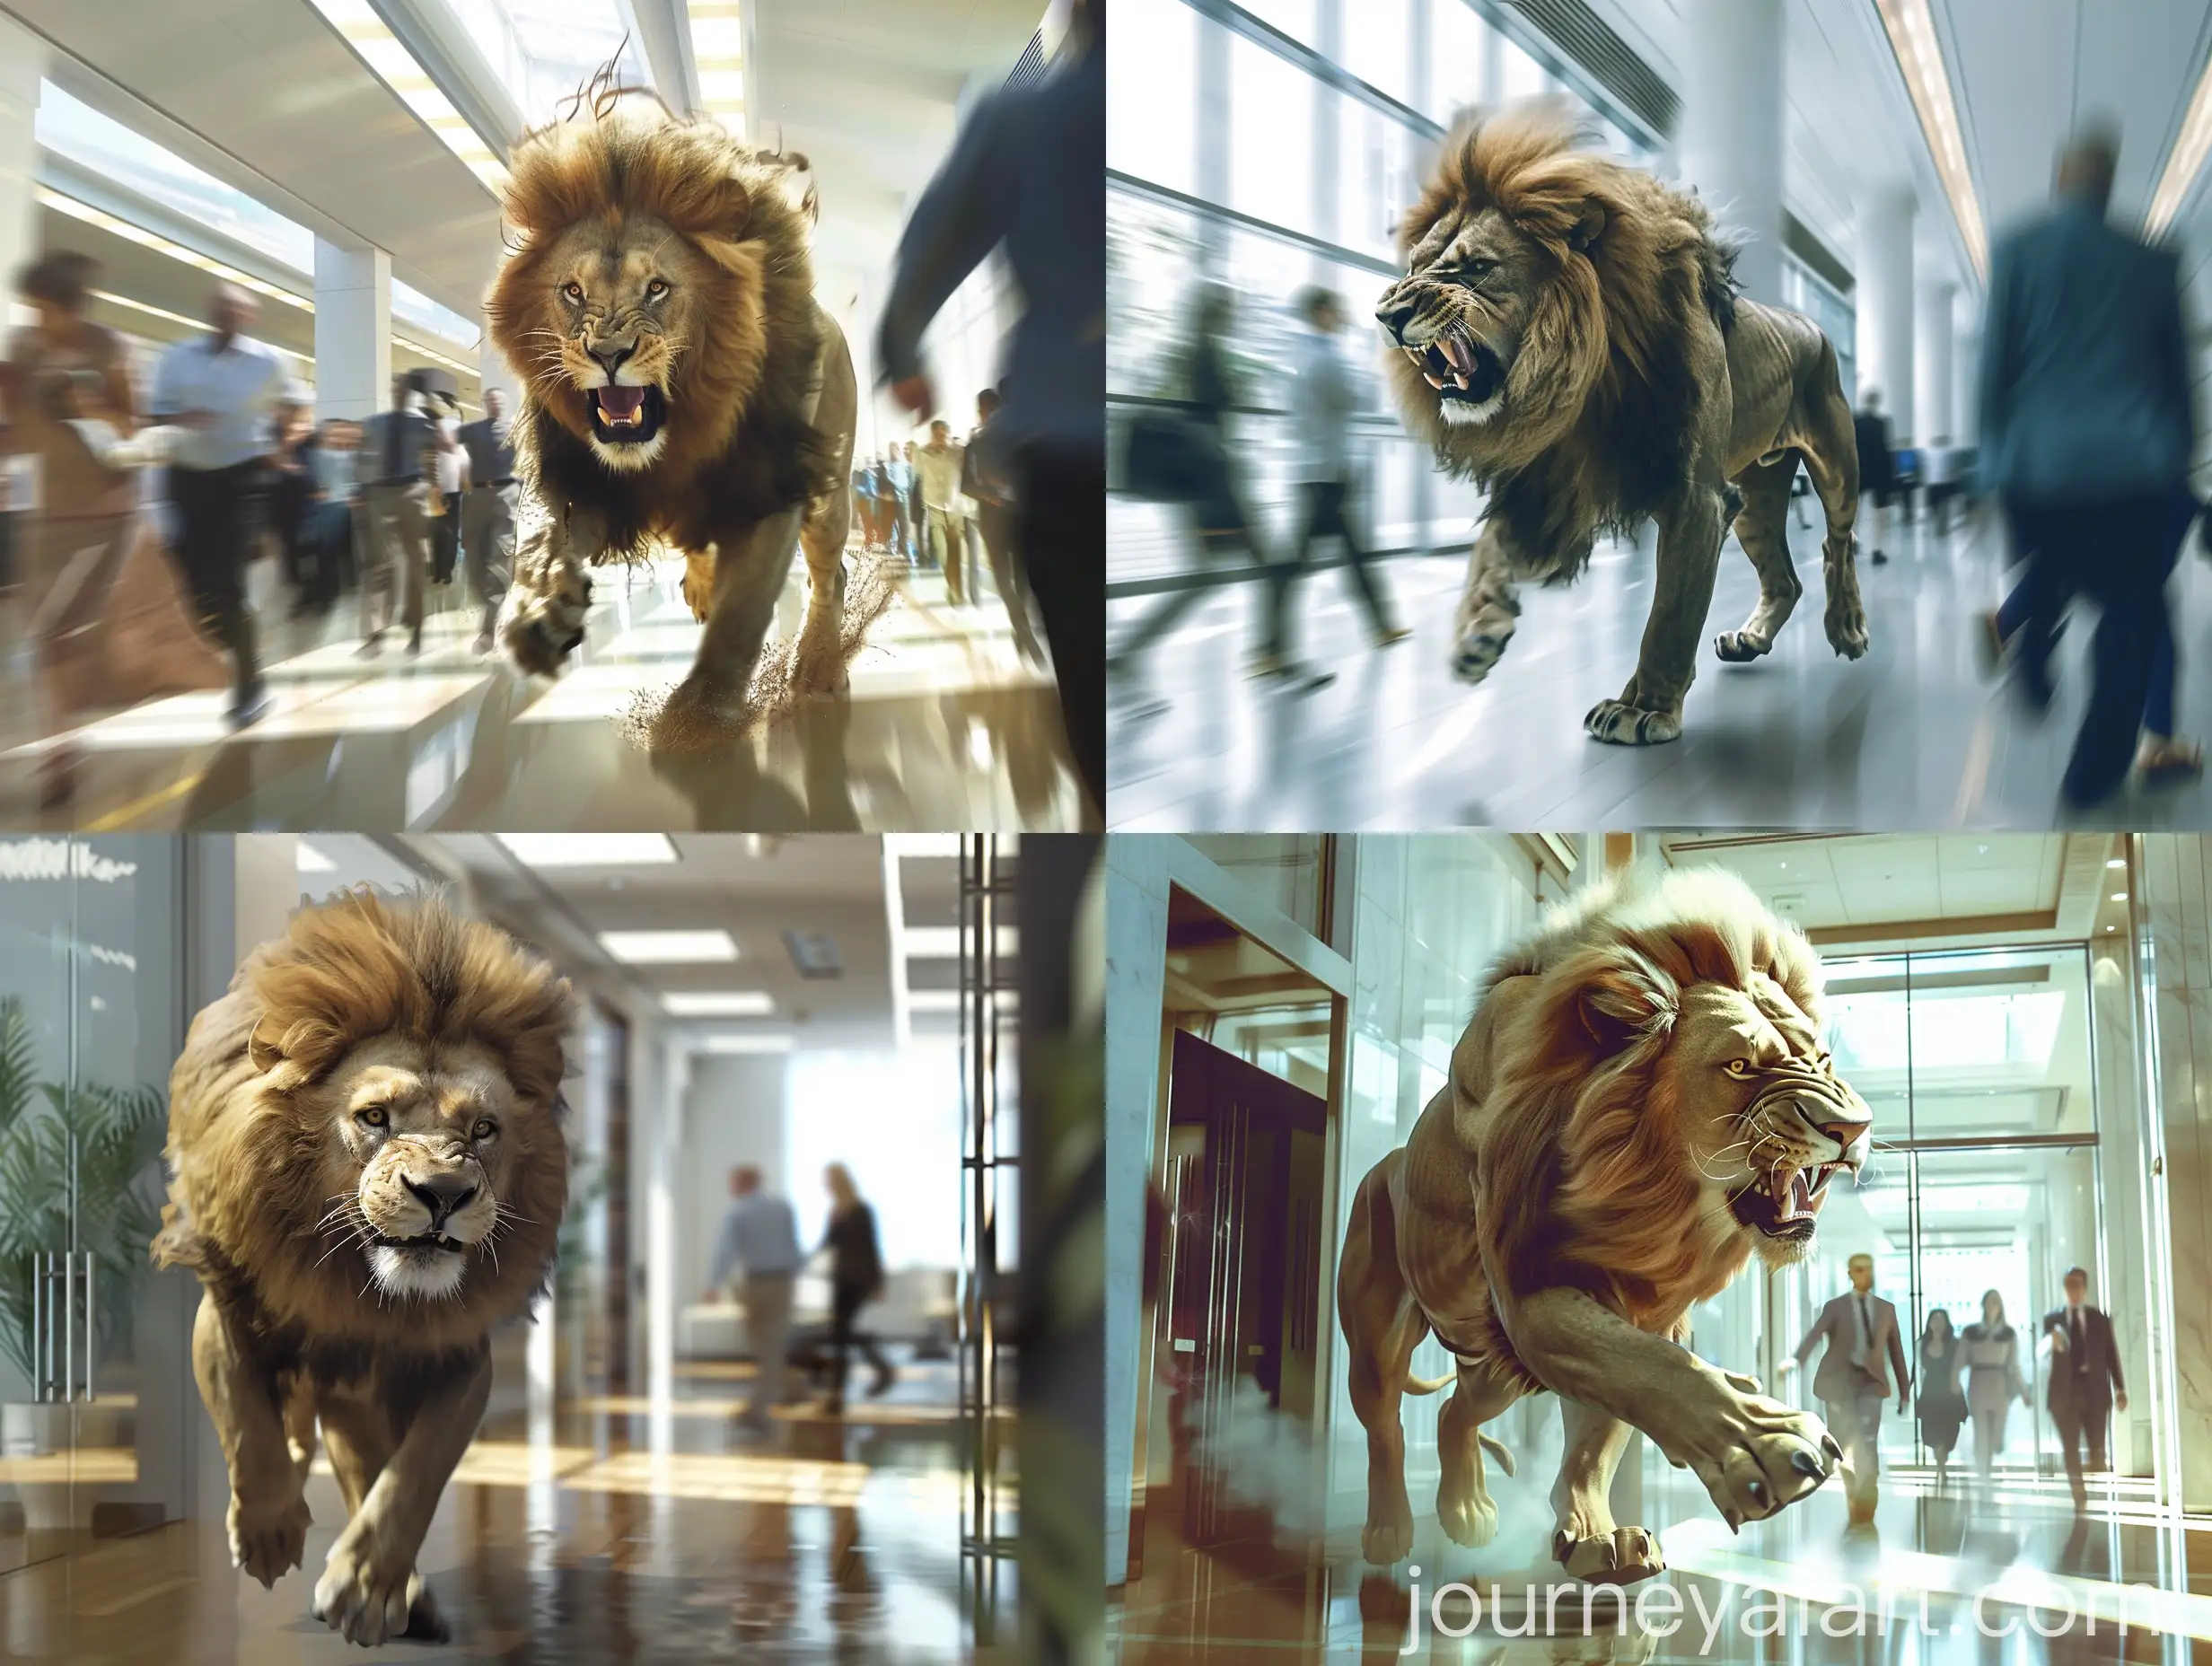 Office-Panic-Lion-Chases-People-in-Realistic-HighQuality-Scene